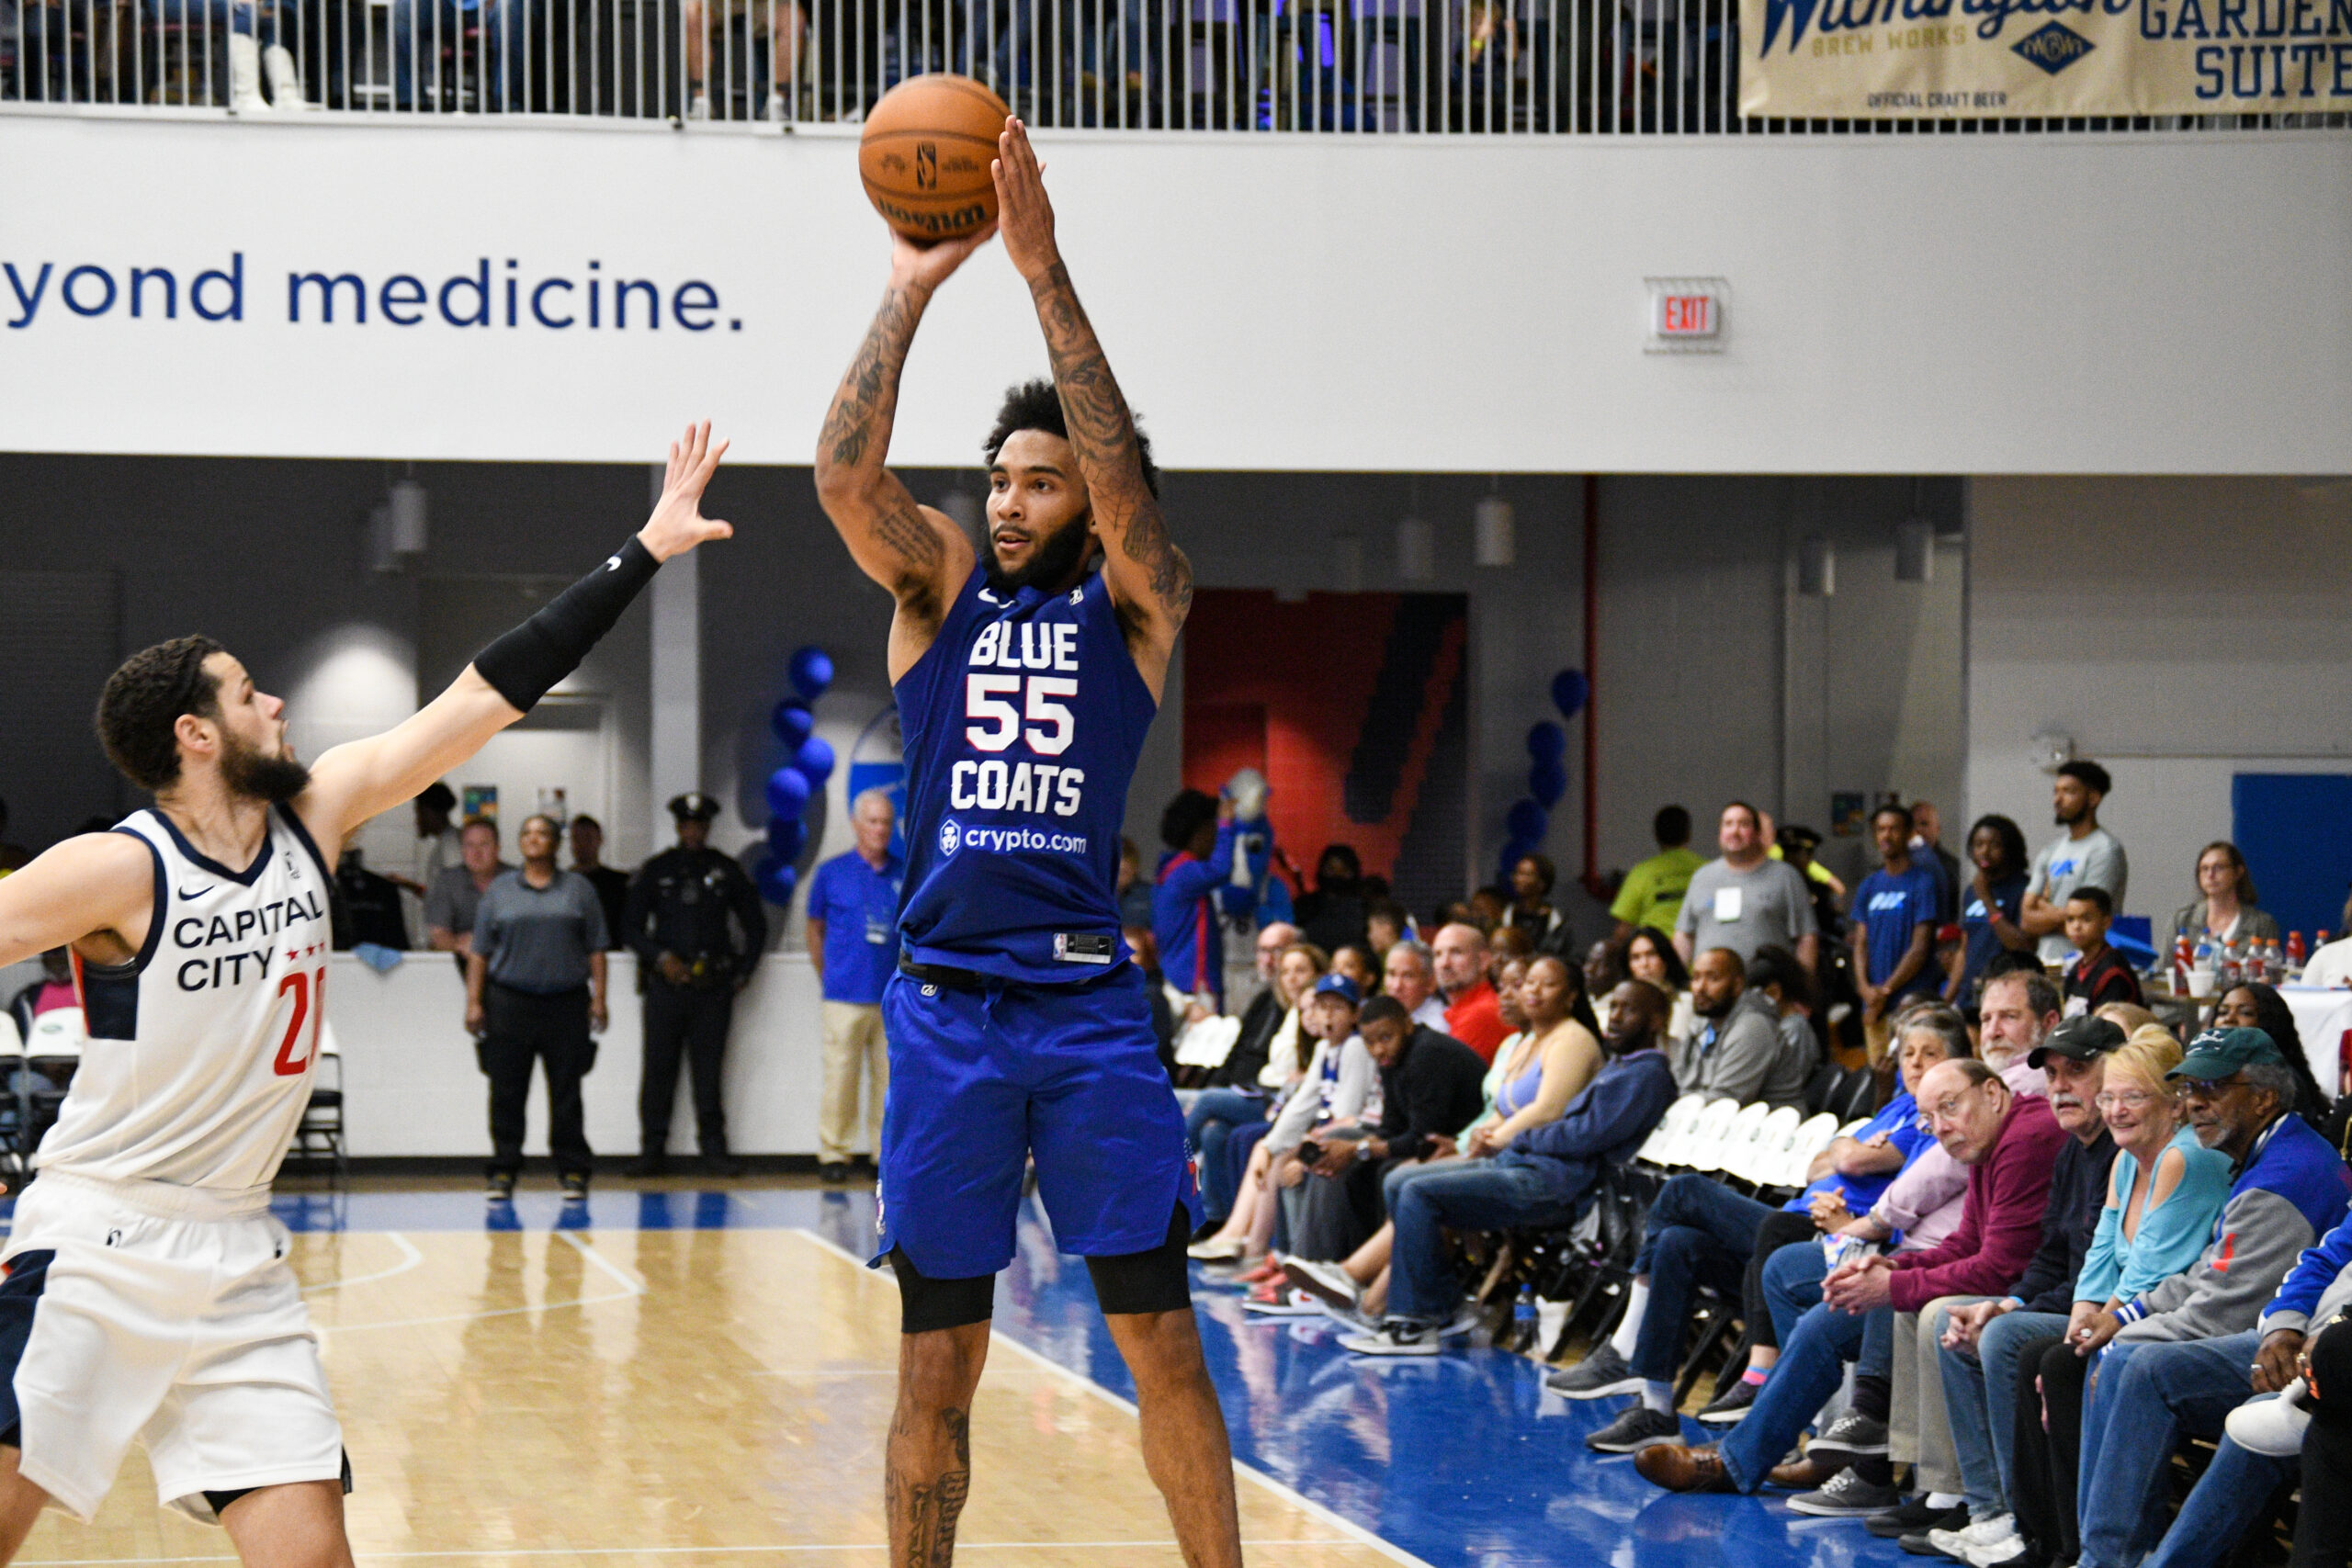 Delaware Blue Coats fall to Capital City Go-Go in home opener